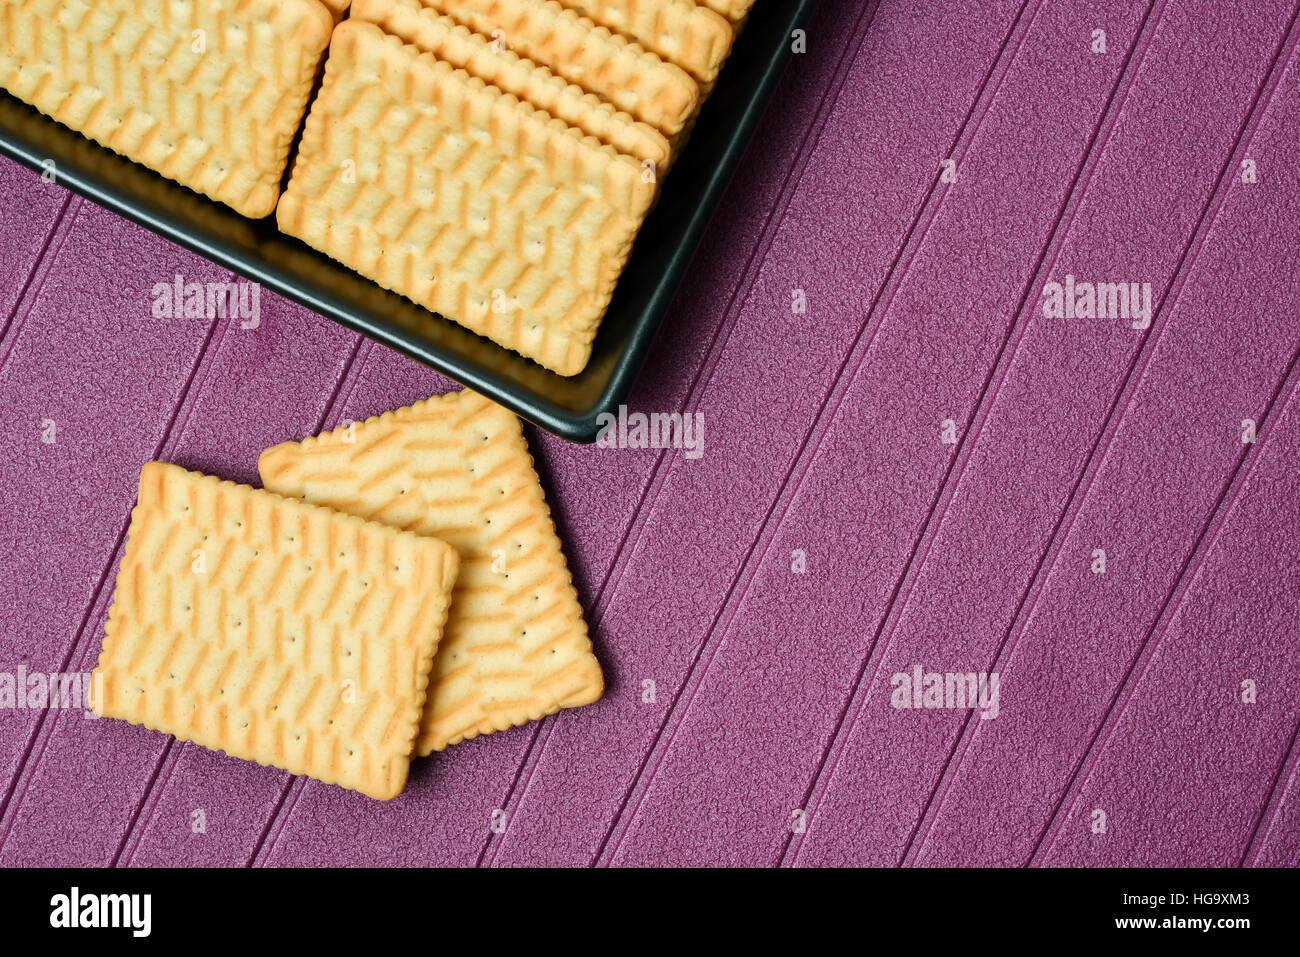 Biscuits on plate on the table light side Stock Photo